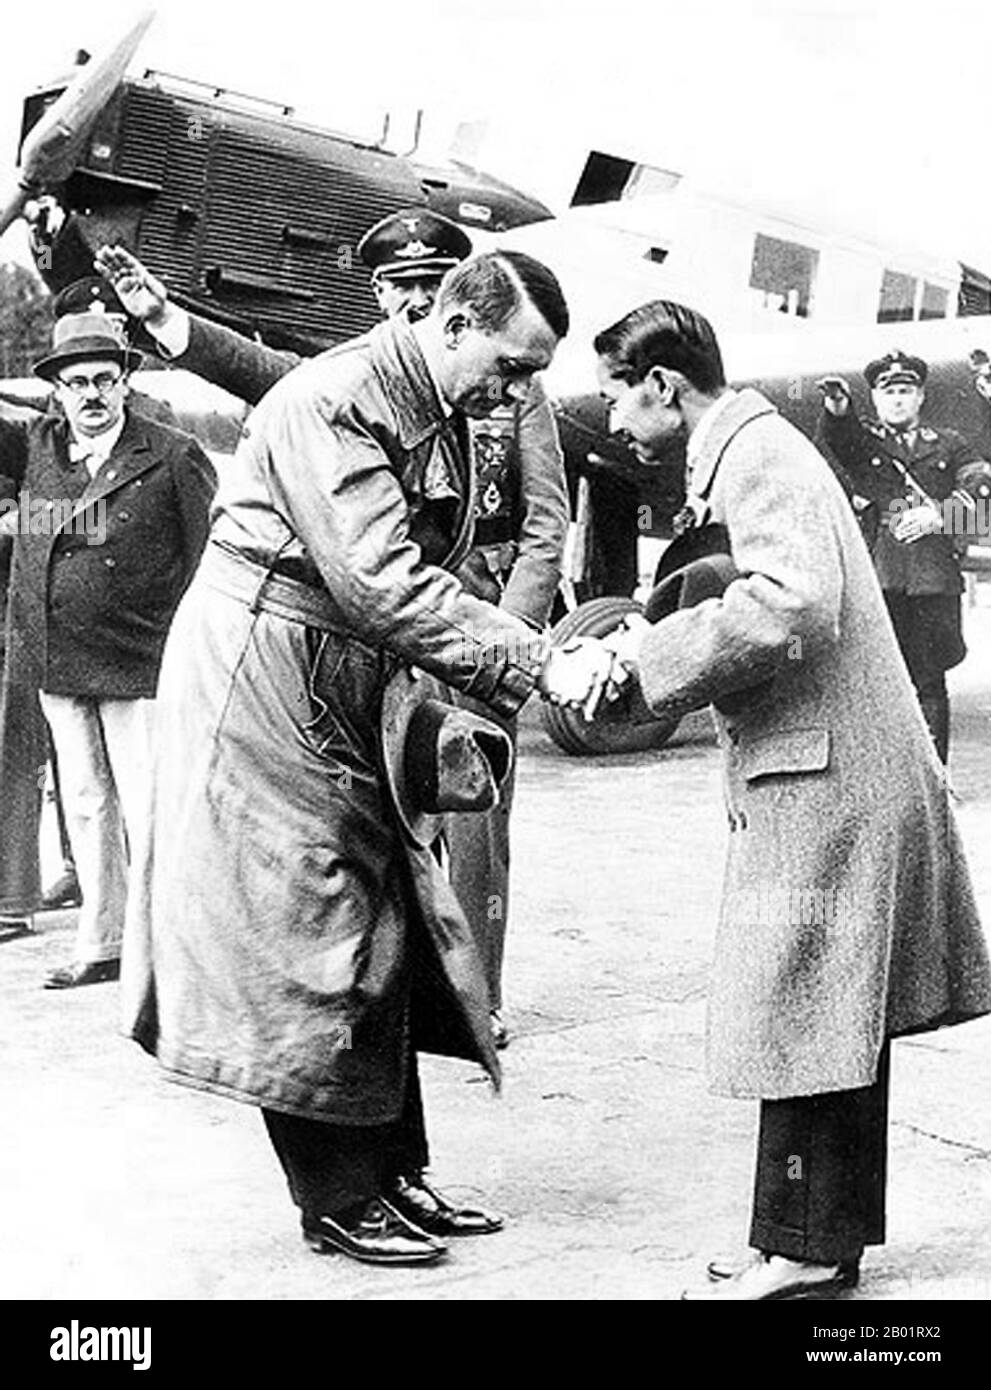 Thailand/Germany: Thailand's King Prajadhipok (8 November 1893 - 30 May 1941) meets German Chancellor Adolf Hitler (20 April 1889 - 30 April 1945), Templehof Airport, Berlin, 1936.  Phra Bat Somdet Phra Poramintharamaha Prajadhipok Phra Pok Klao Chao Yu Hua (Thai: พระบาทสมเด็จพระปรมินทรมหาประชาธิปกฯ พระปกเกล้าเจ้าอยู่หัว), or Rama VII, was the seventh monarch of Siam under the House of Chakri. He was the last absolute monarch and the first constitutional monarch of the country. His reign was a turbulent time for Siam due to huge political and social changes during the Revolution of 1932. Stock Photo